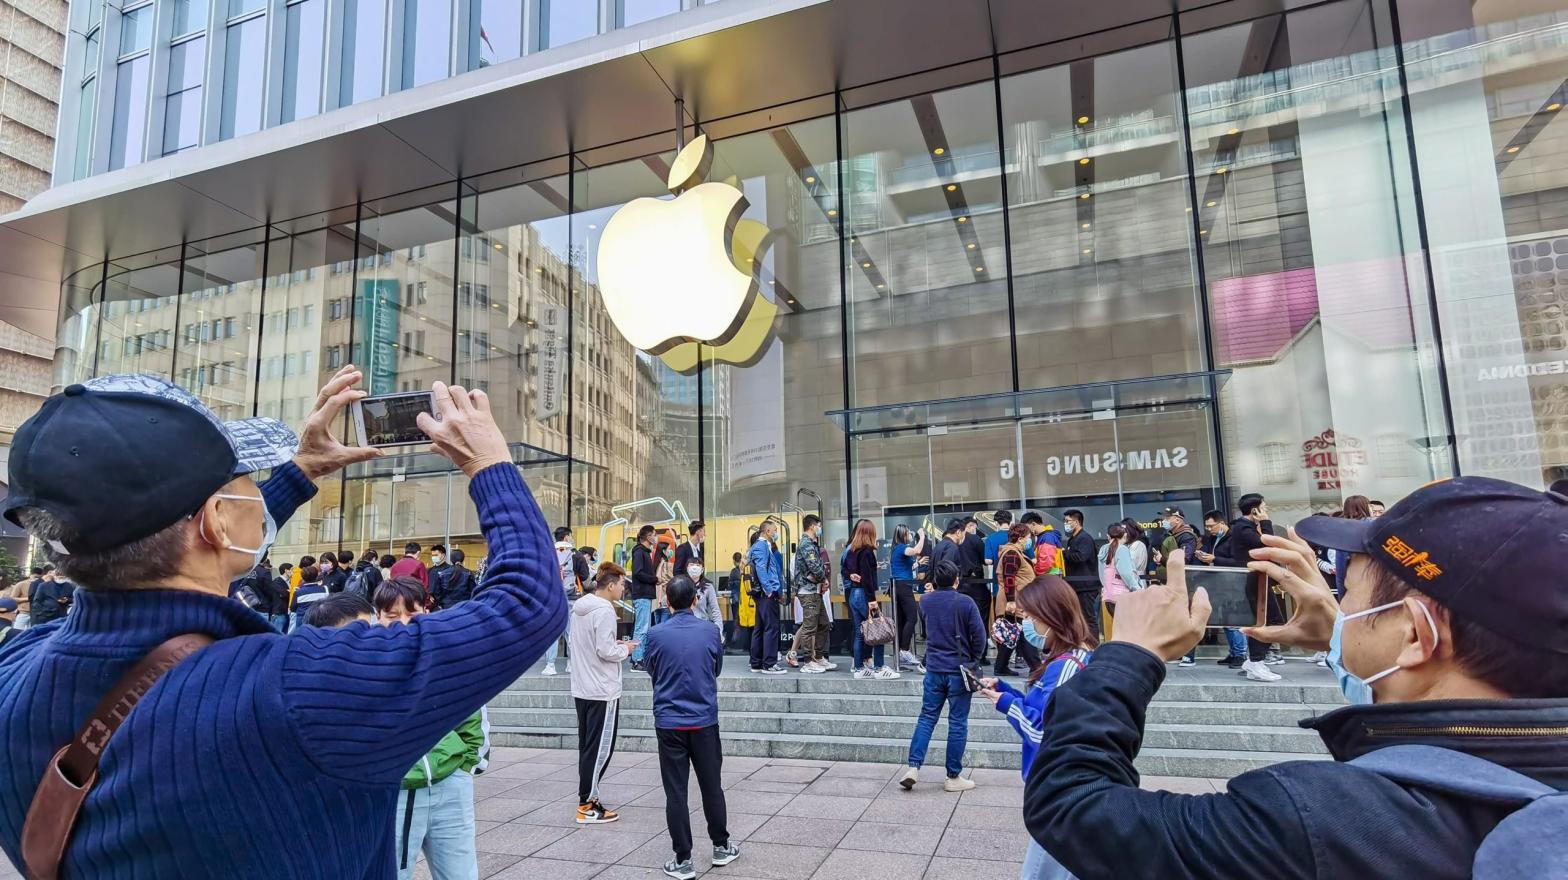 Customers queue to get their reserved iPhone 12 mobile phones at an Apple store in Shanghai on Oct. 23, 2020. (Photo: STR/AFP, Getty Images)